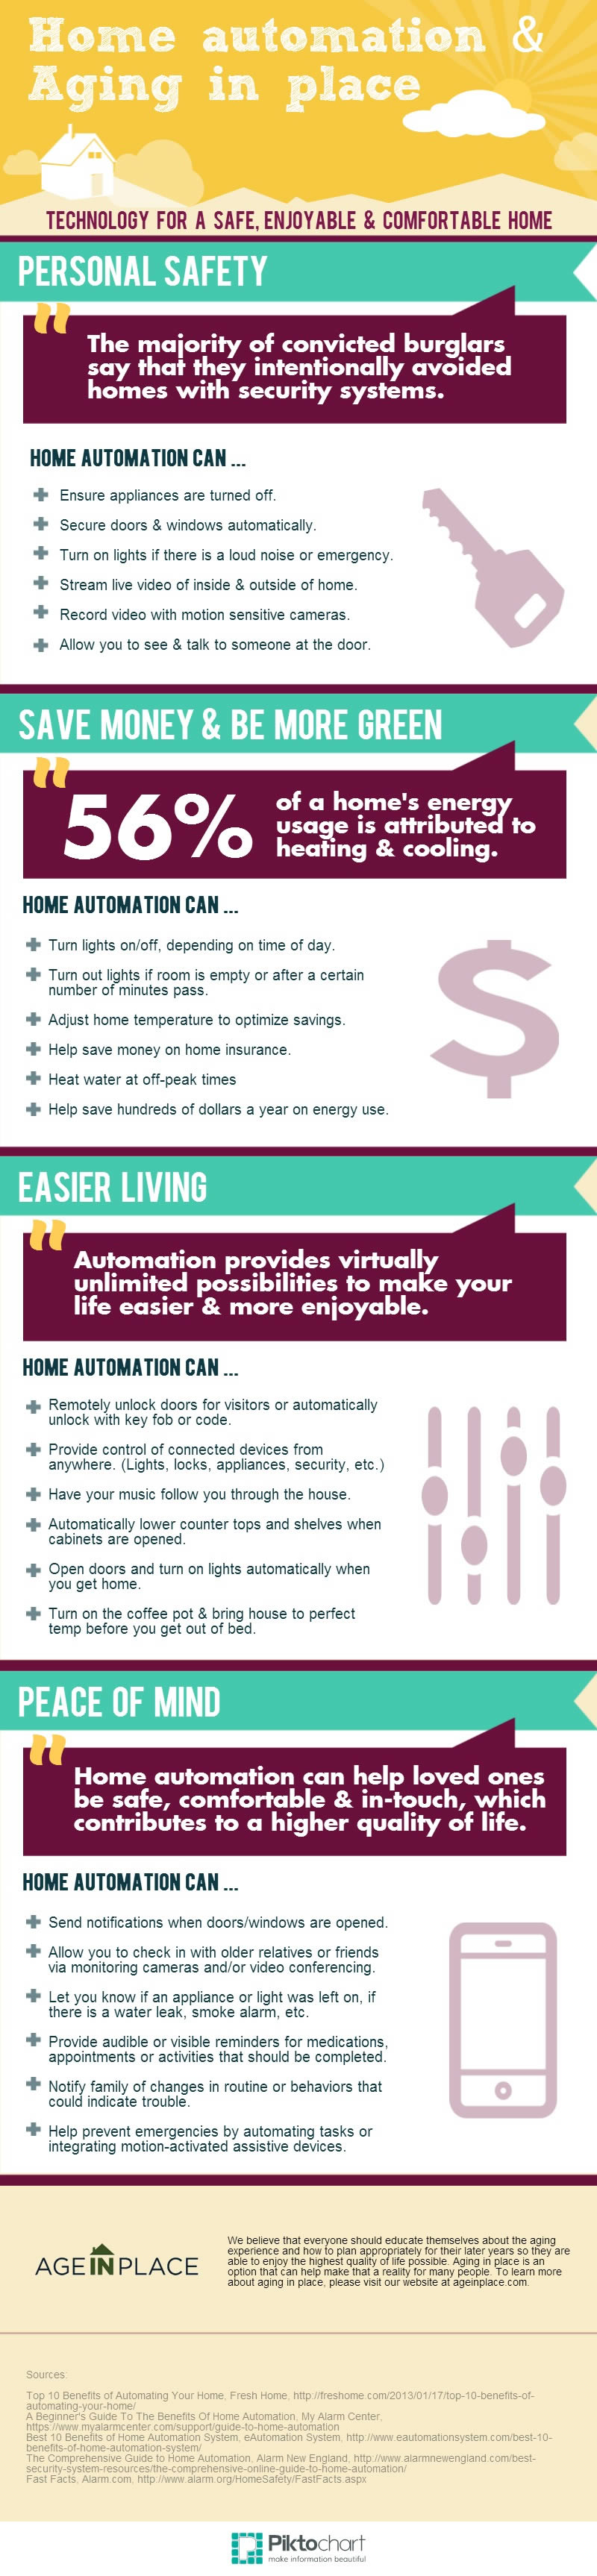 Home automation benefits for aging in place - Infographic